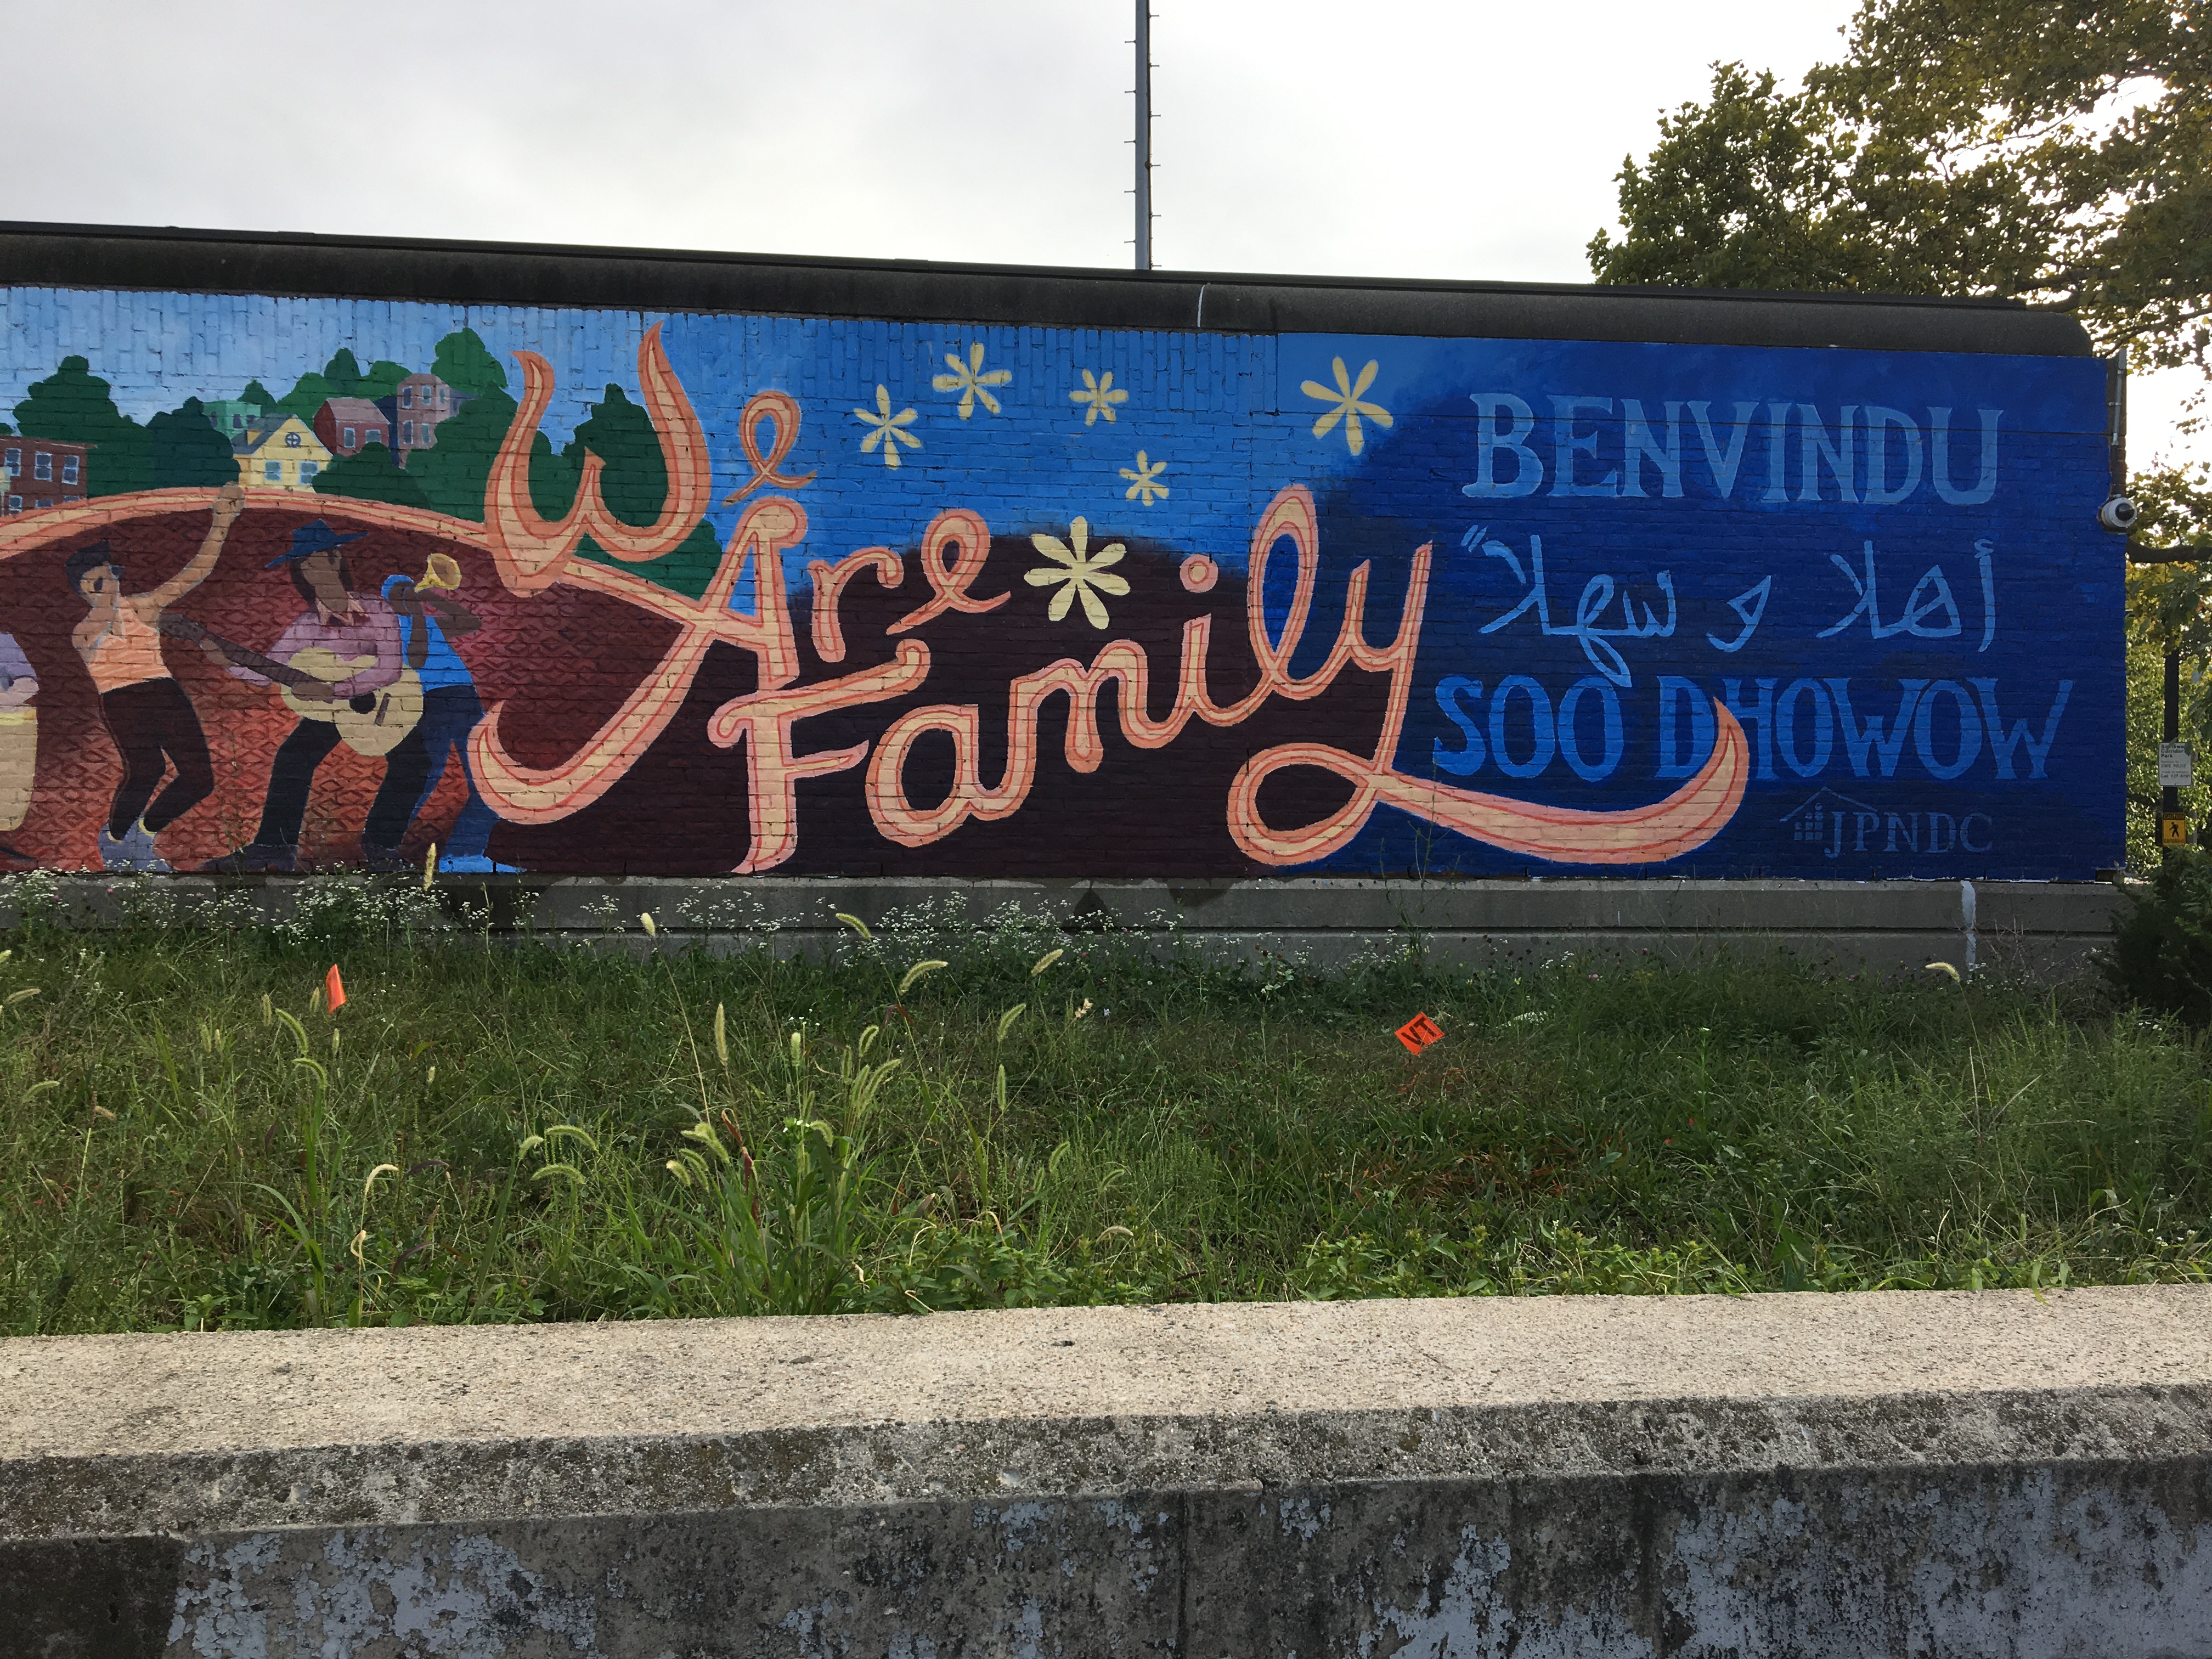 Mural near Jackson Square - "We are Family"